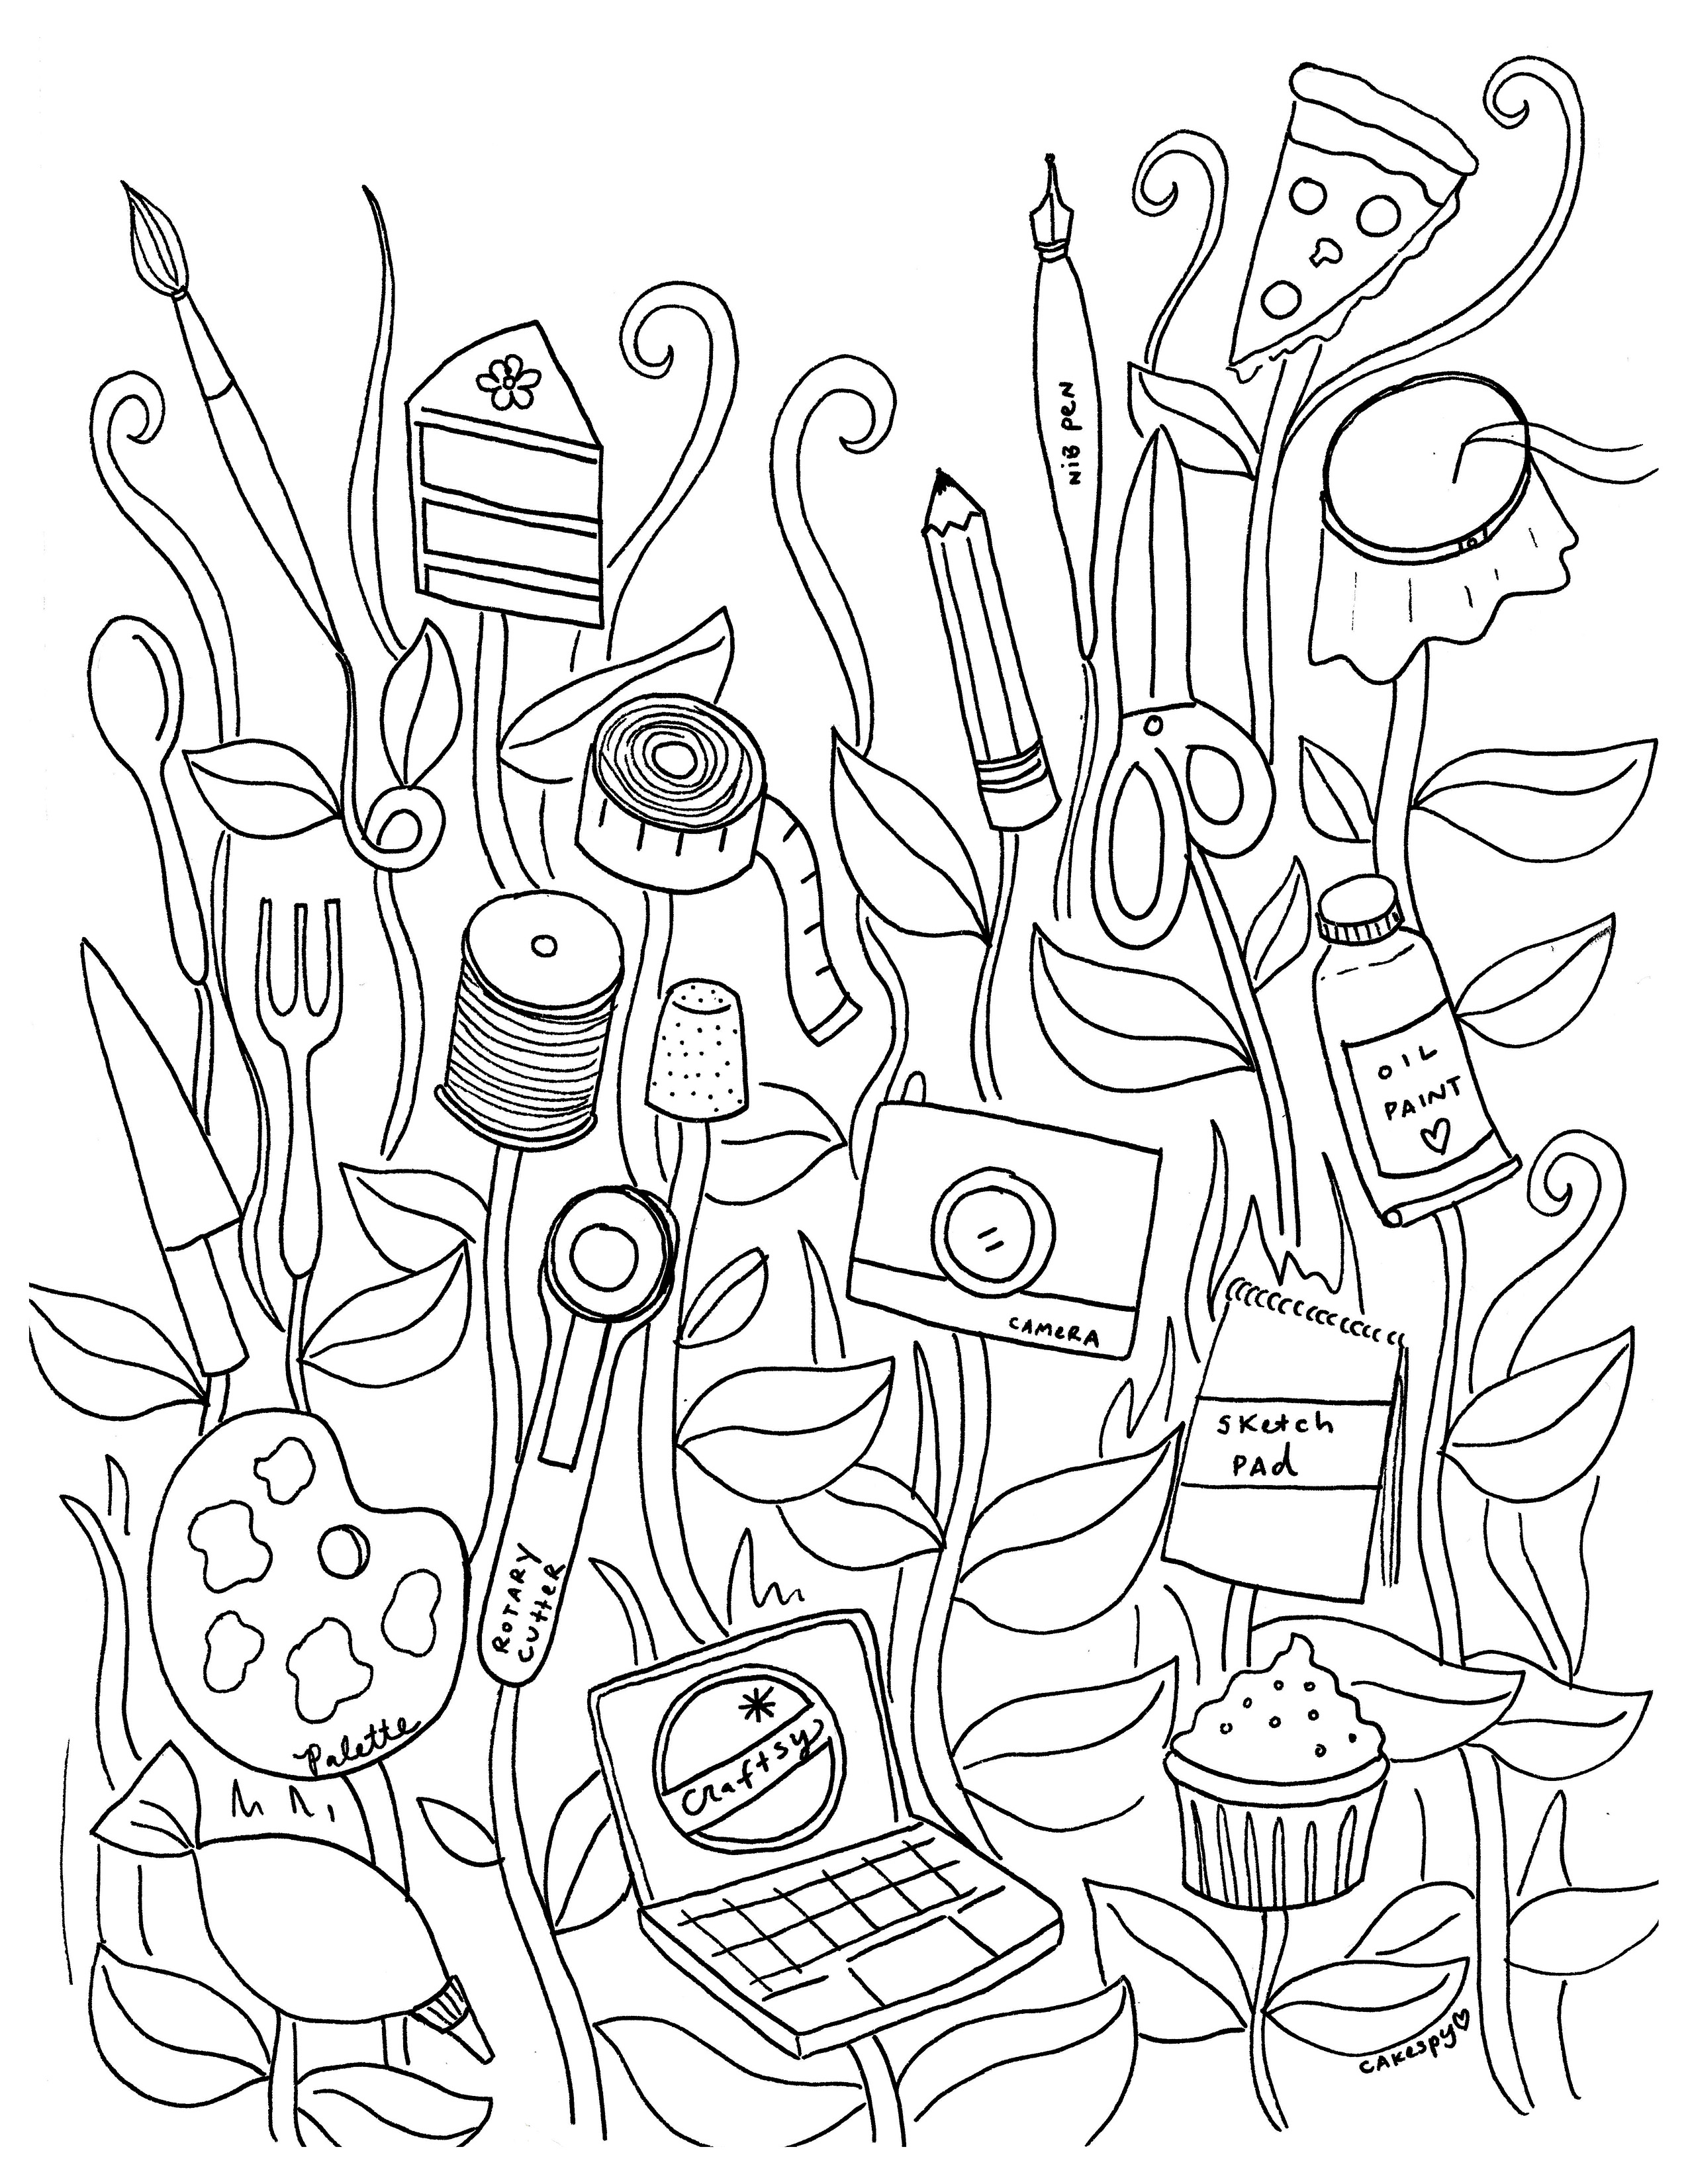 sewing-coloring-pages-at-getcolorings-free-printable-colorings-pages-to-print-and-color